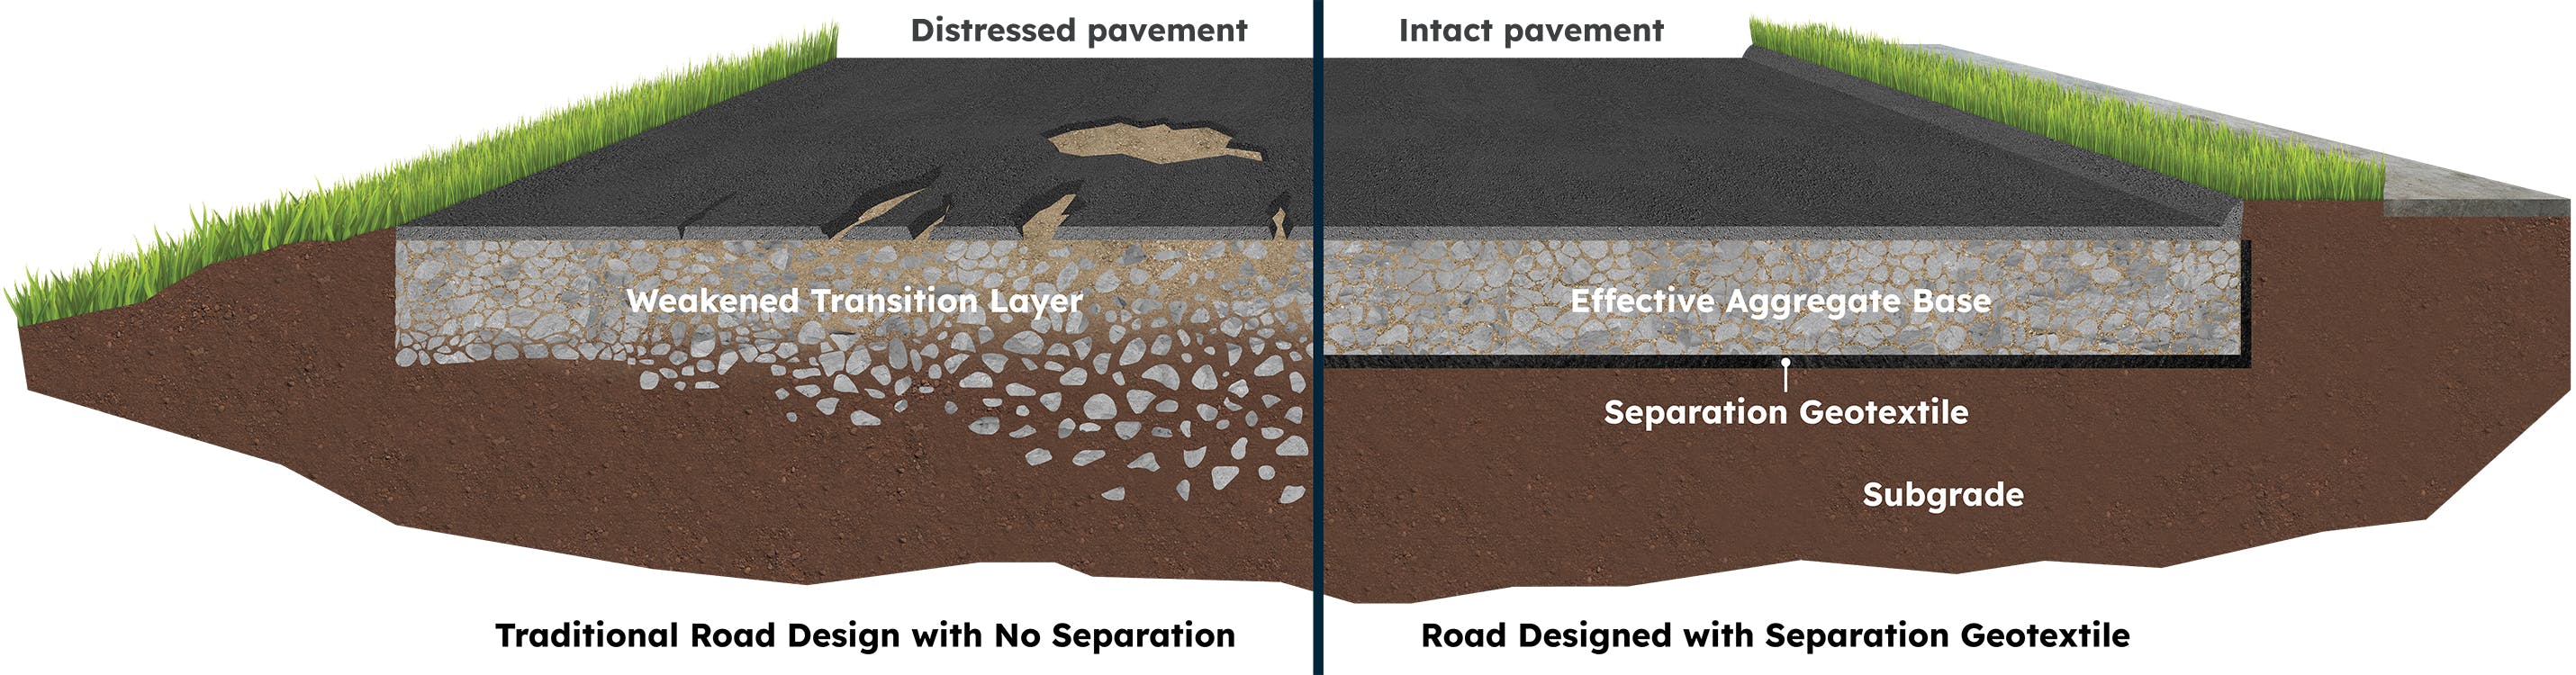 Figure 1: Separation effect of geotextile between soft subgrade and roadway aggregate